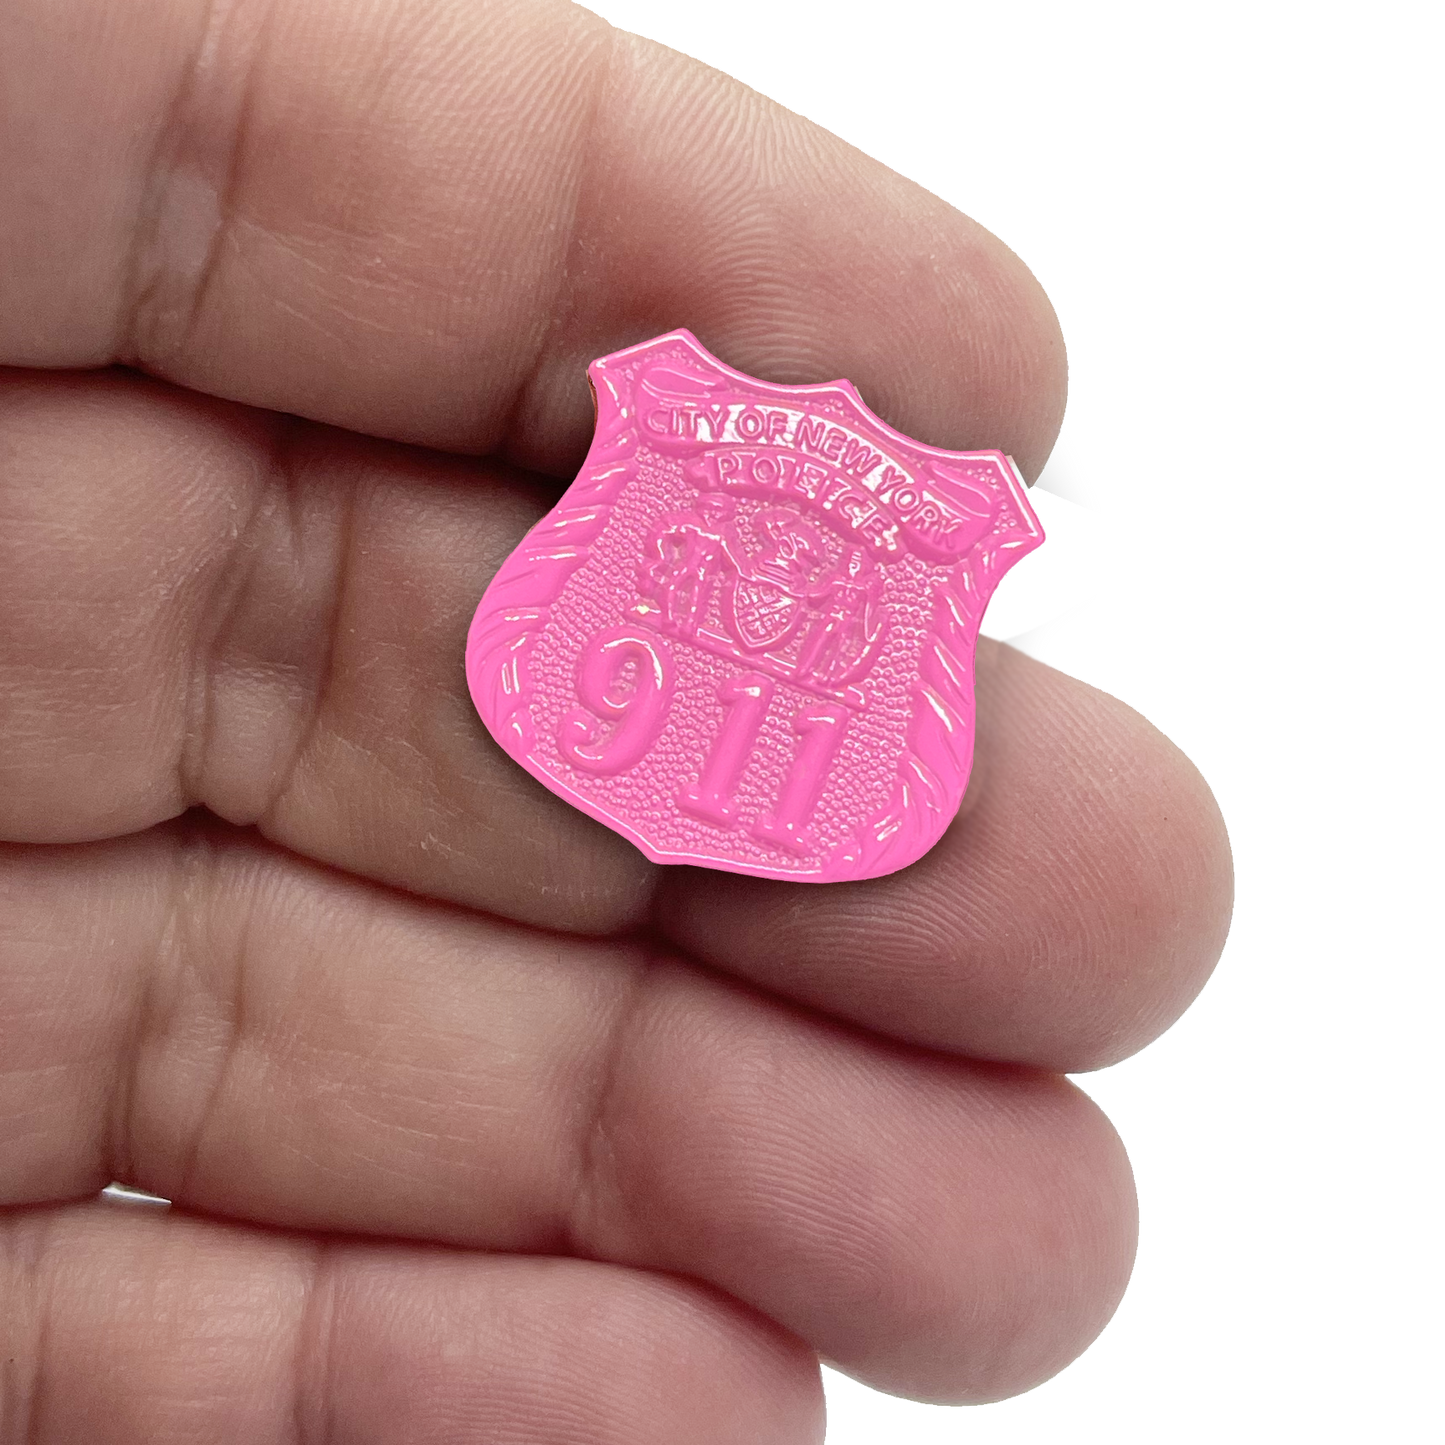 KK-014 Pink Breast Cancer Awareness Month NYPD NYC City of New York Police Department Police Officer lapel pin Thin Pink Line